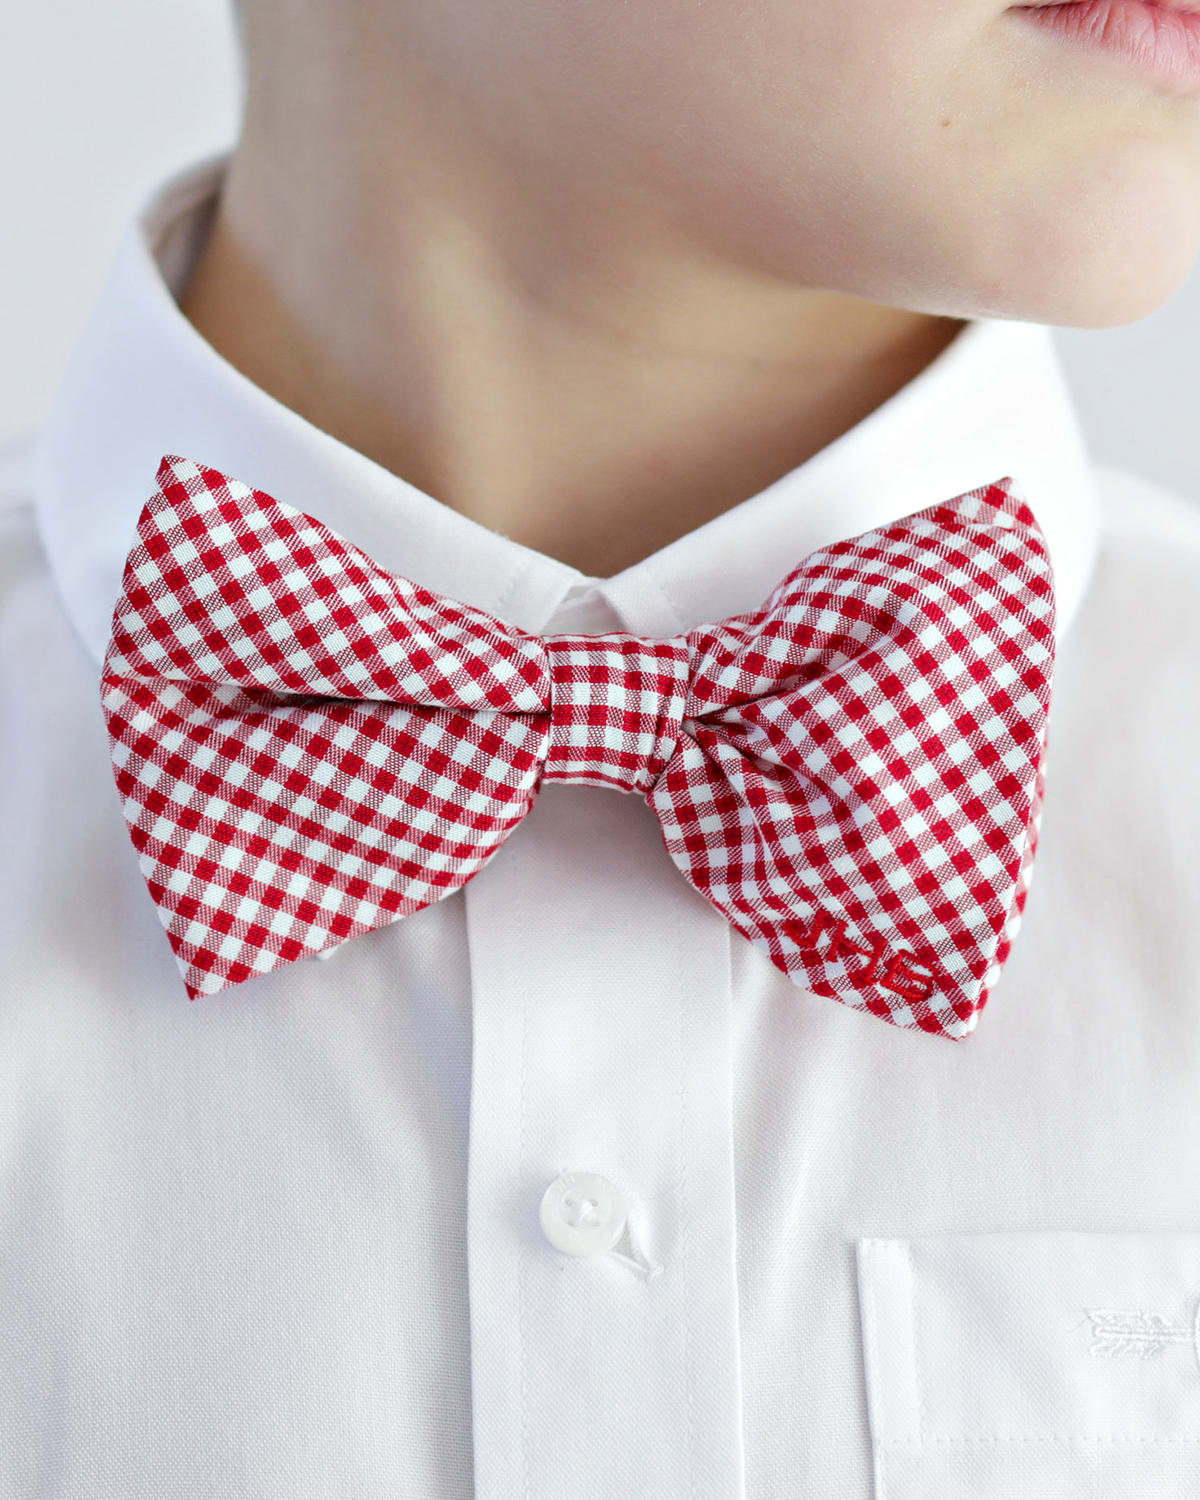 Brown Bowen and Company Boys' Clip-On Bow Tie - Monogram Option